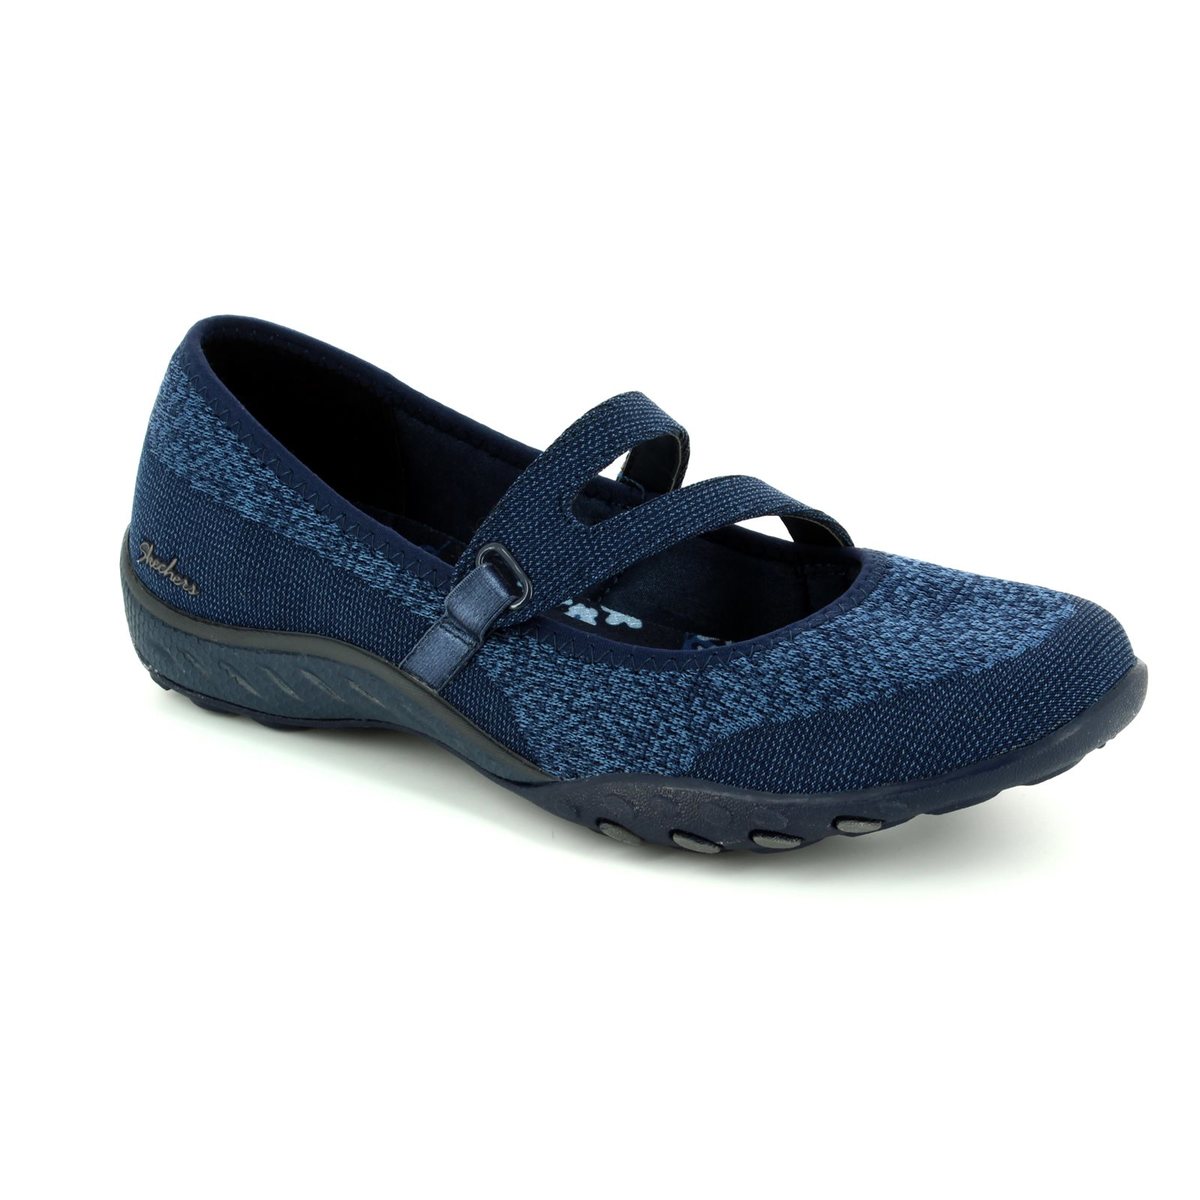 skechers lucky lady mary janes